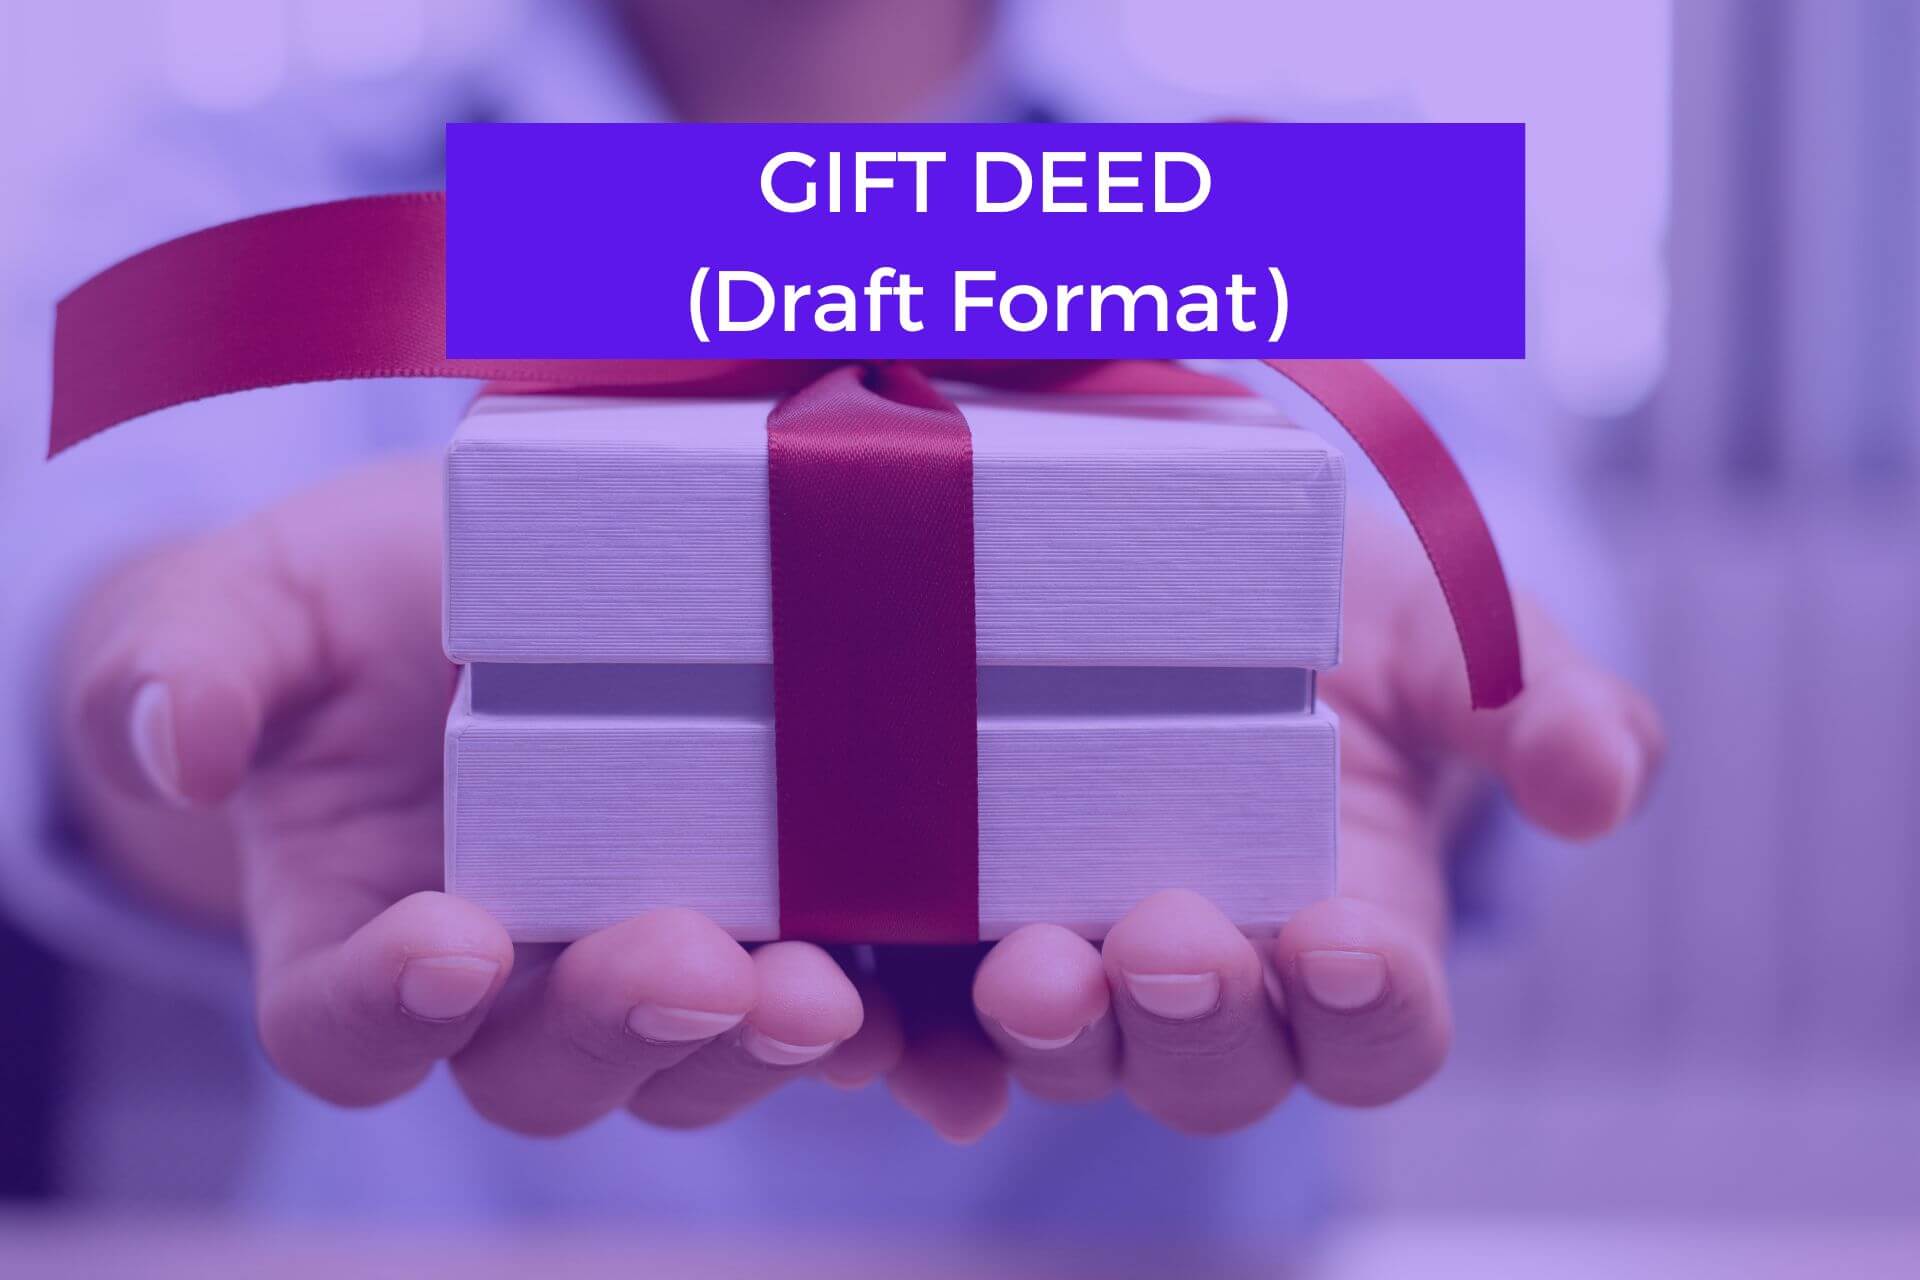 Gift deed lets one gift assets without exchange of money | Mint